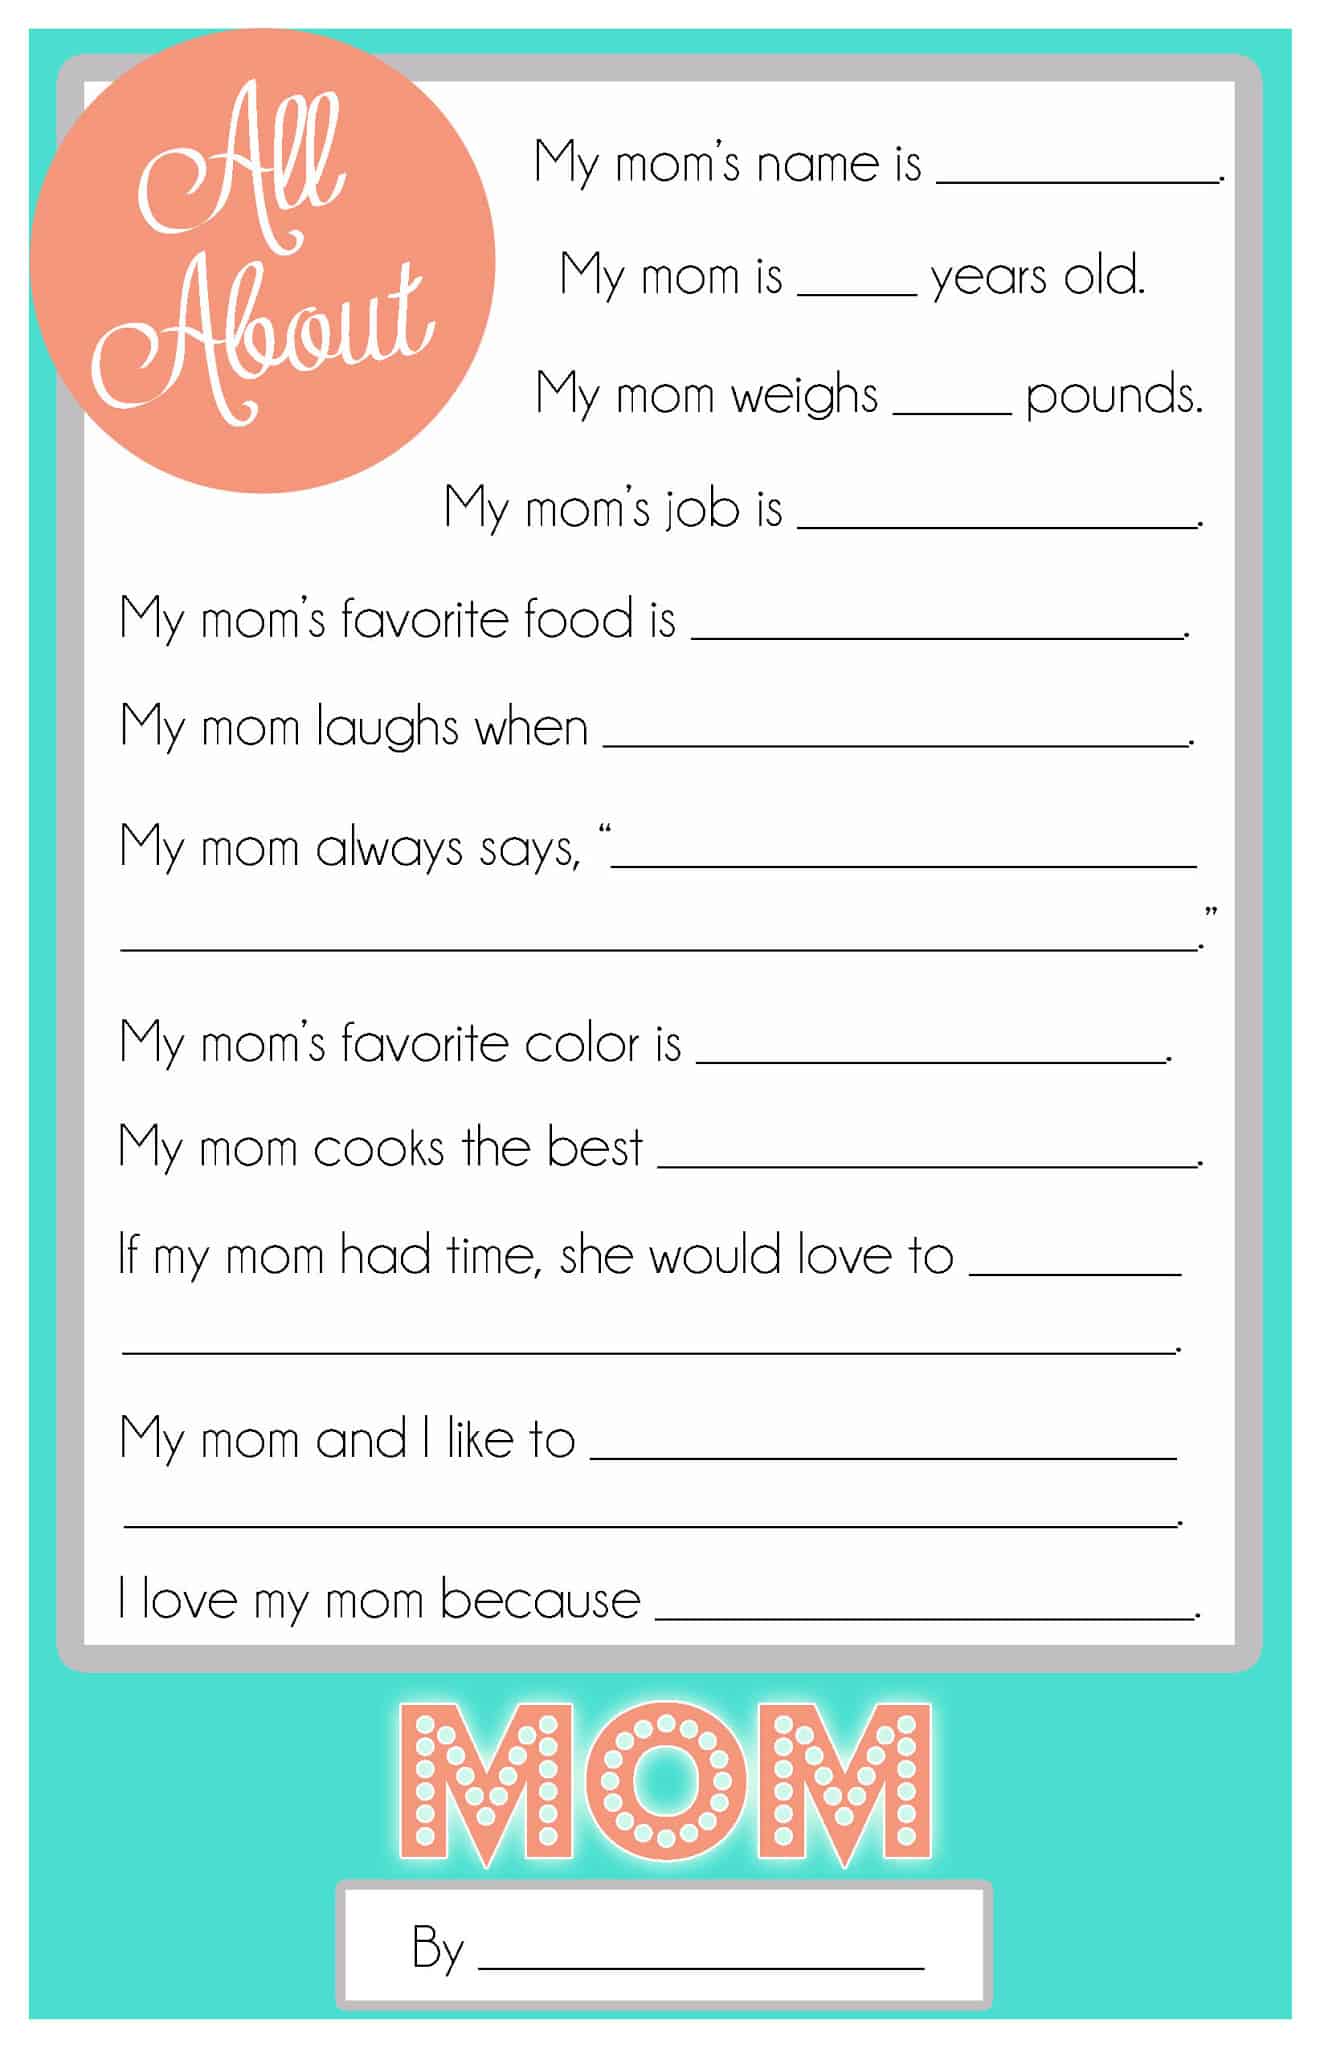 Mother's Day Questionnaire {A FREE Printable for the Kids!} Cupcake